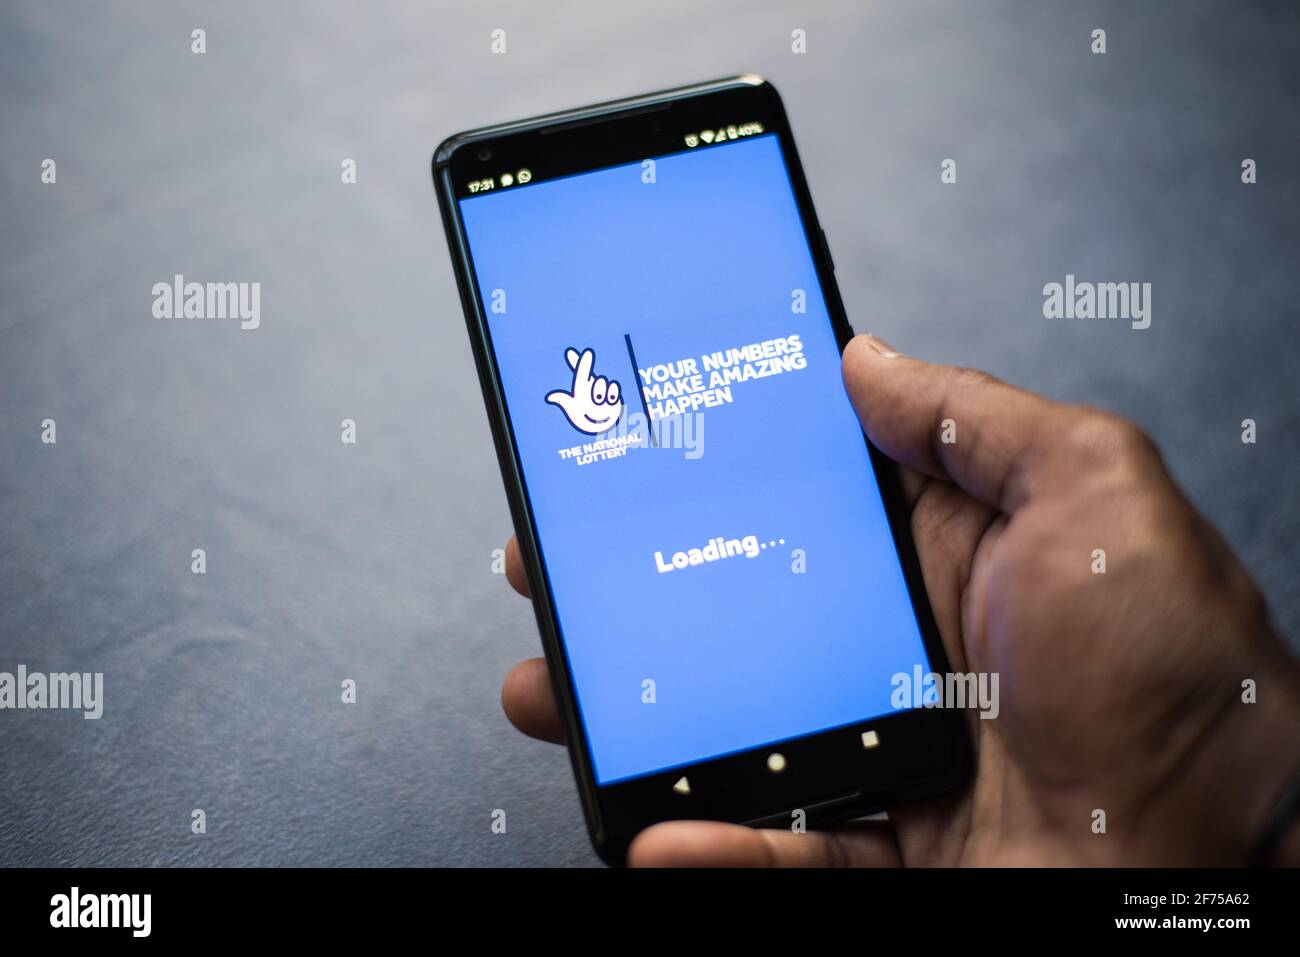 Lotto lottery application on a smartphone held by adult asian man Stock Photo